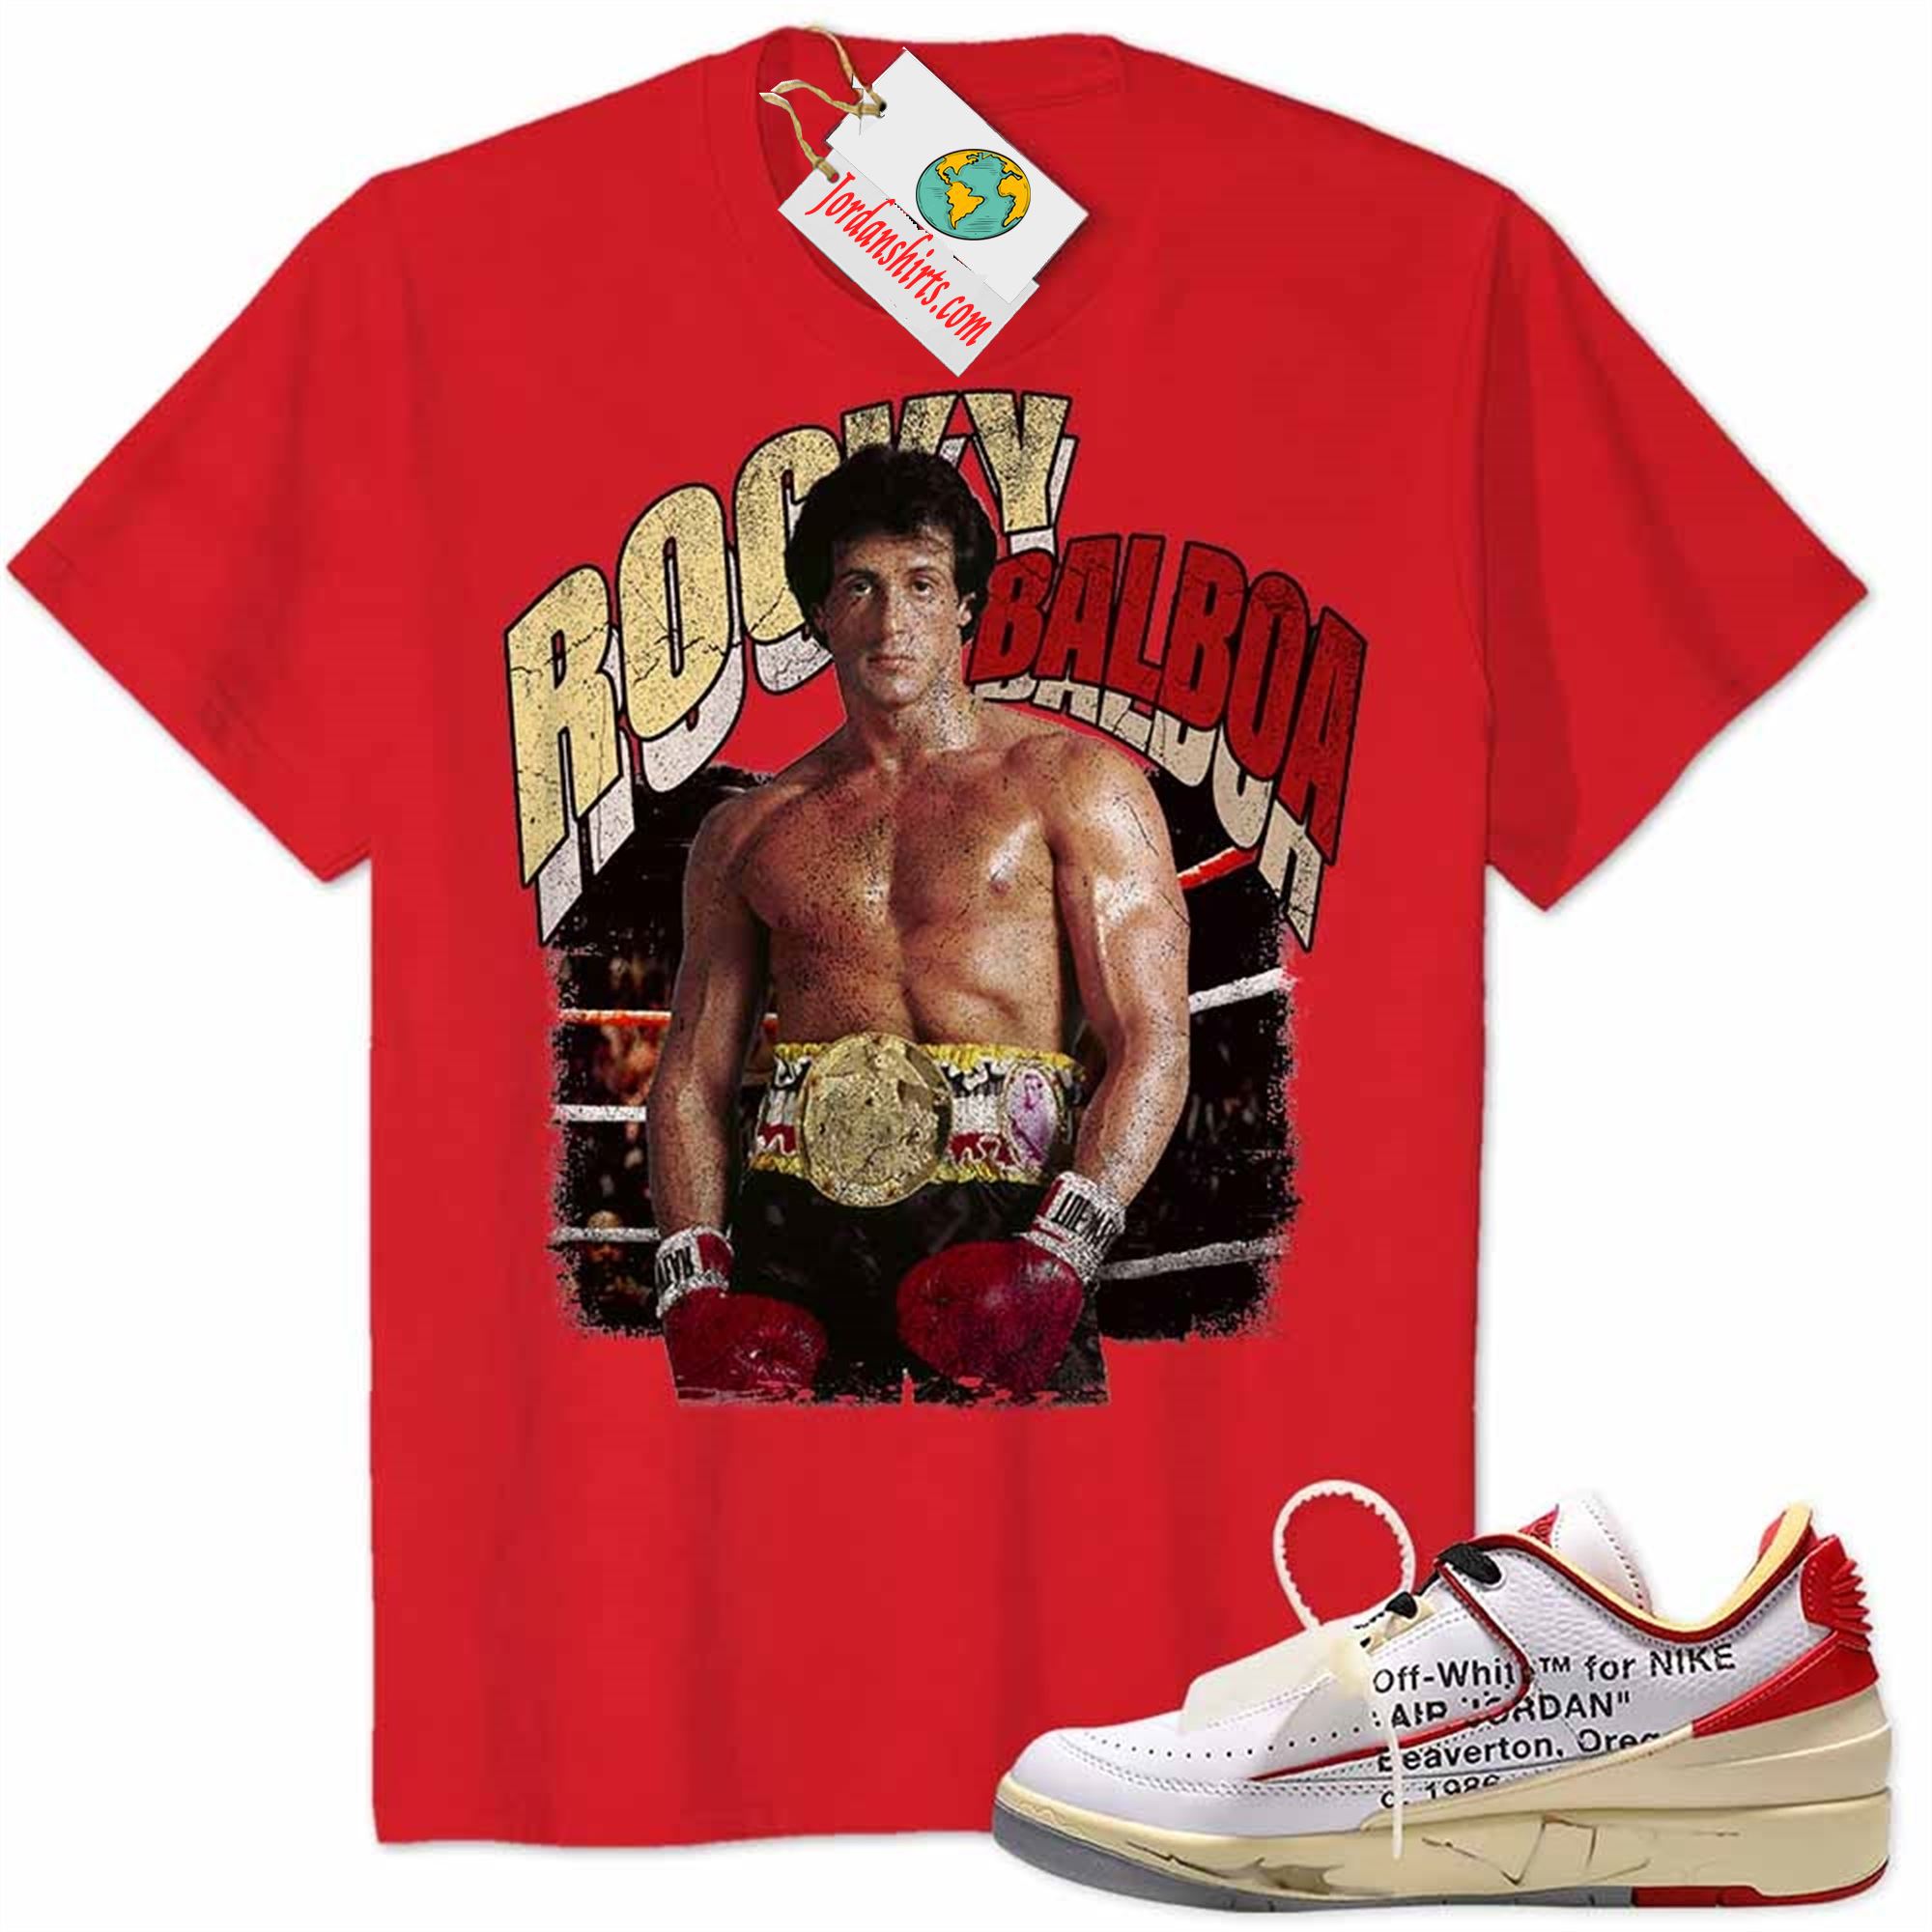 Jordan 2 Shirt, Rocky Balboa Sylvester Stallone Vintage 90s Red Air Jordan 2 Low White Red Off-white 2s Size Up To 5xl